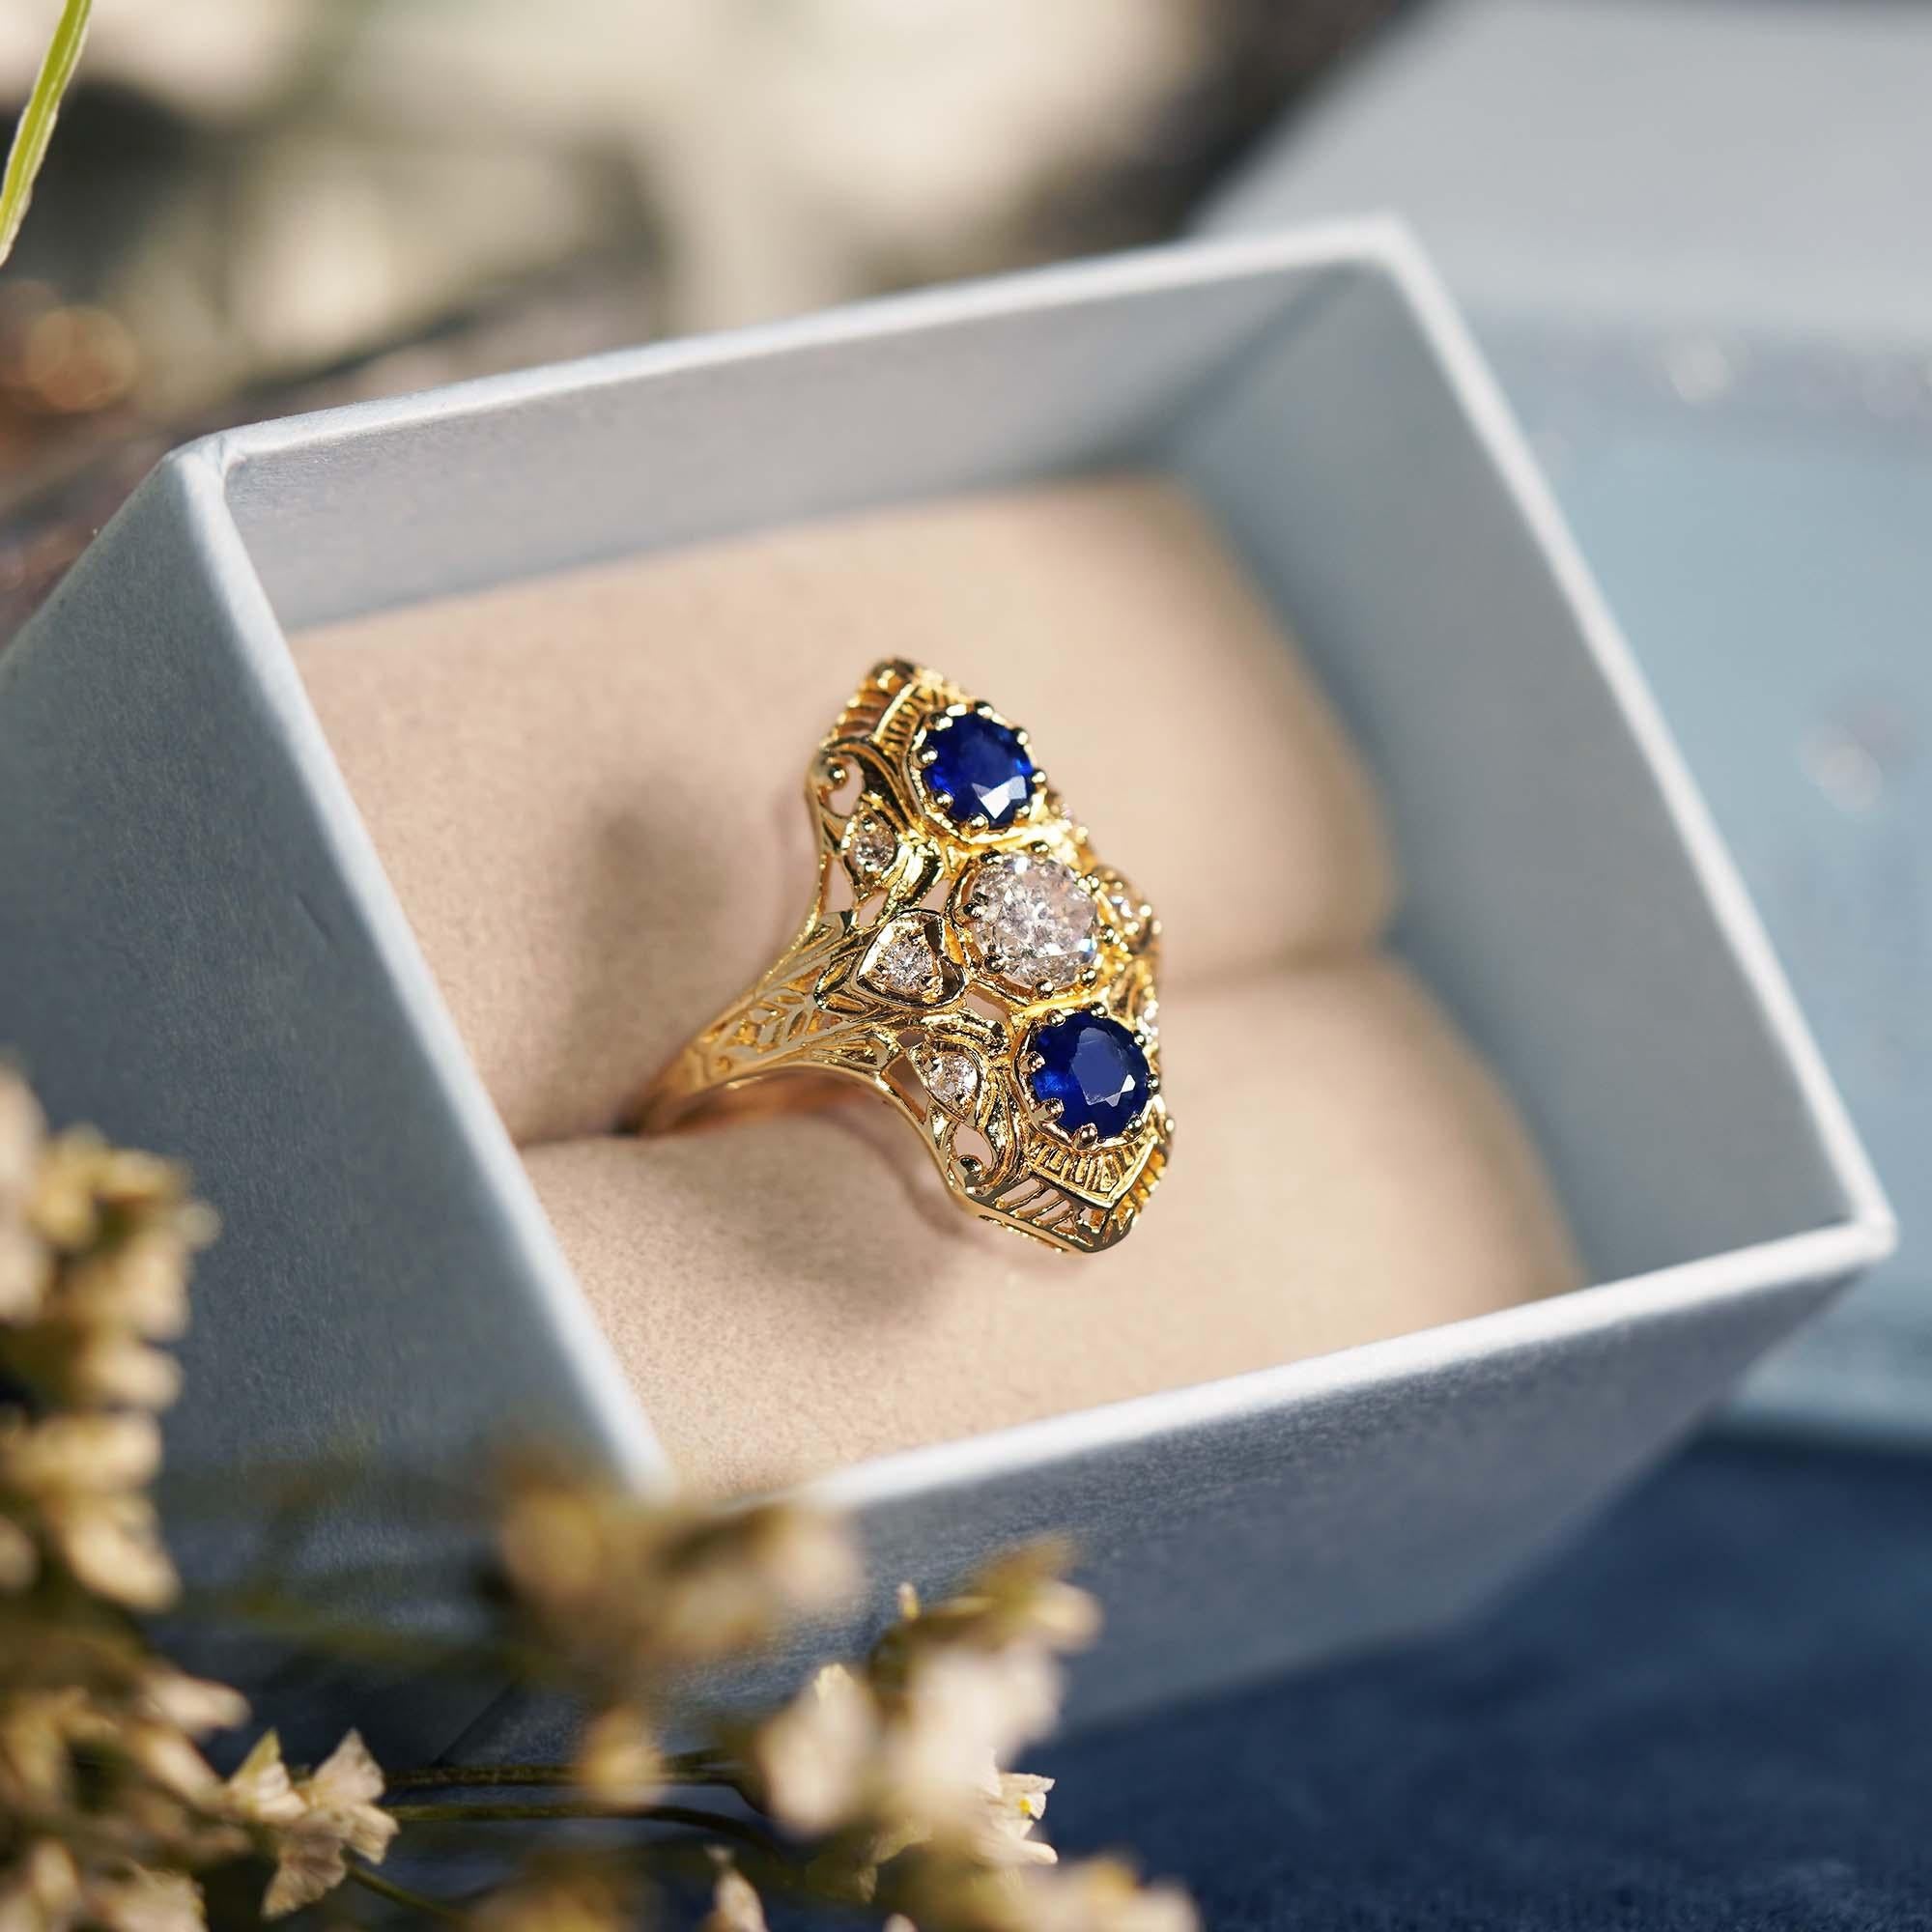 For Sale:  Diamond and Blue Sapphire Antique Style Filigree Three Stone Ring in 9K Gold 6